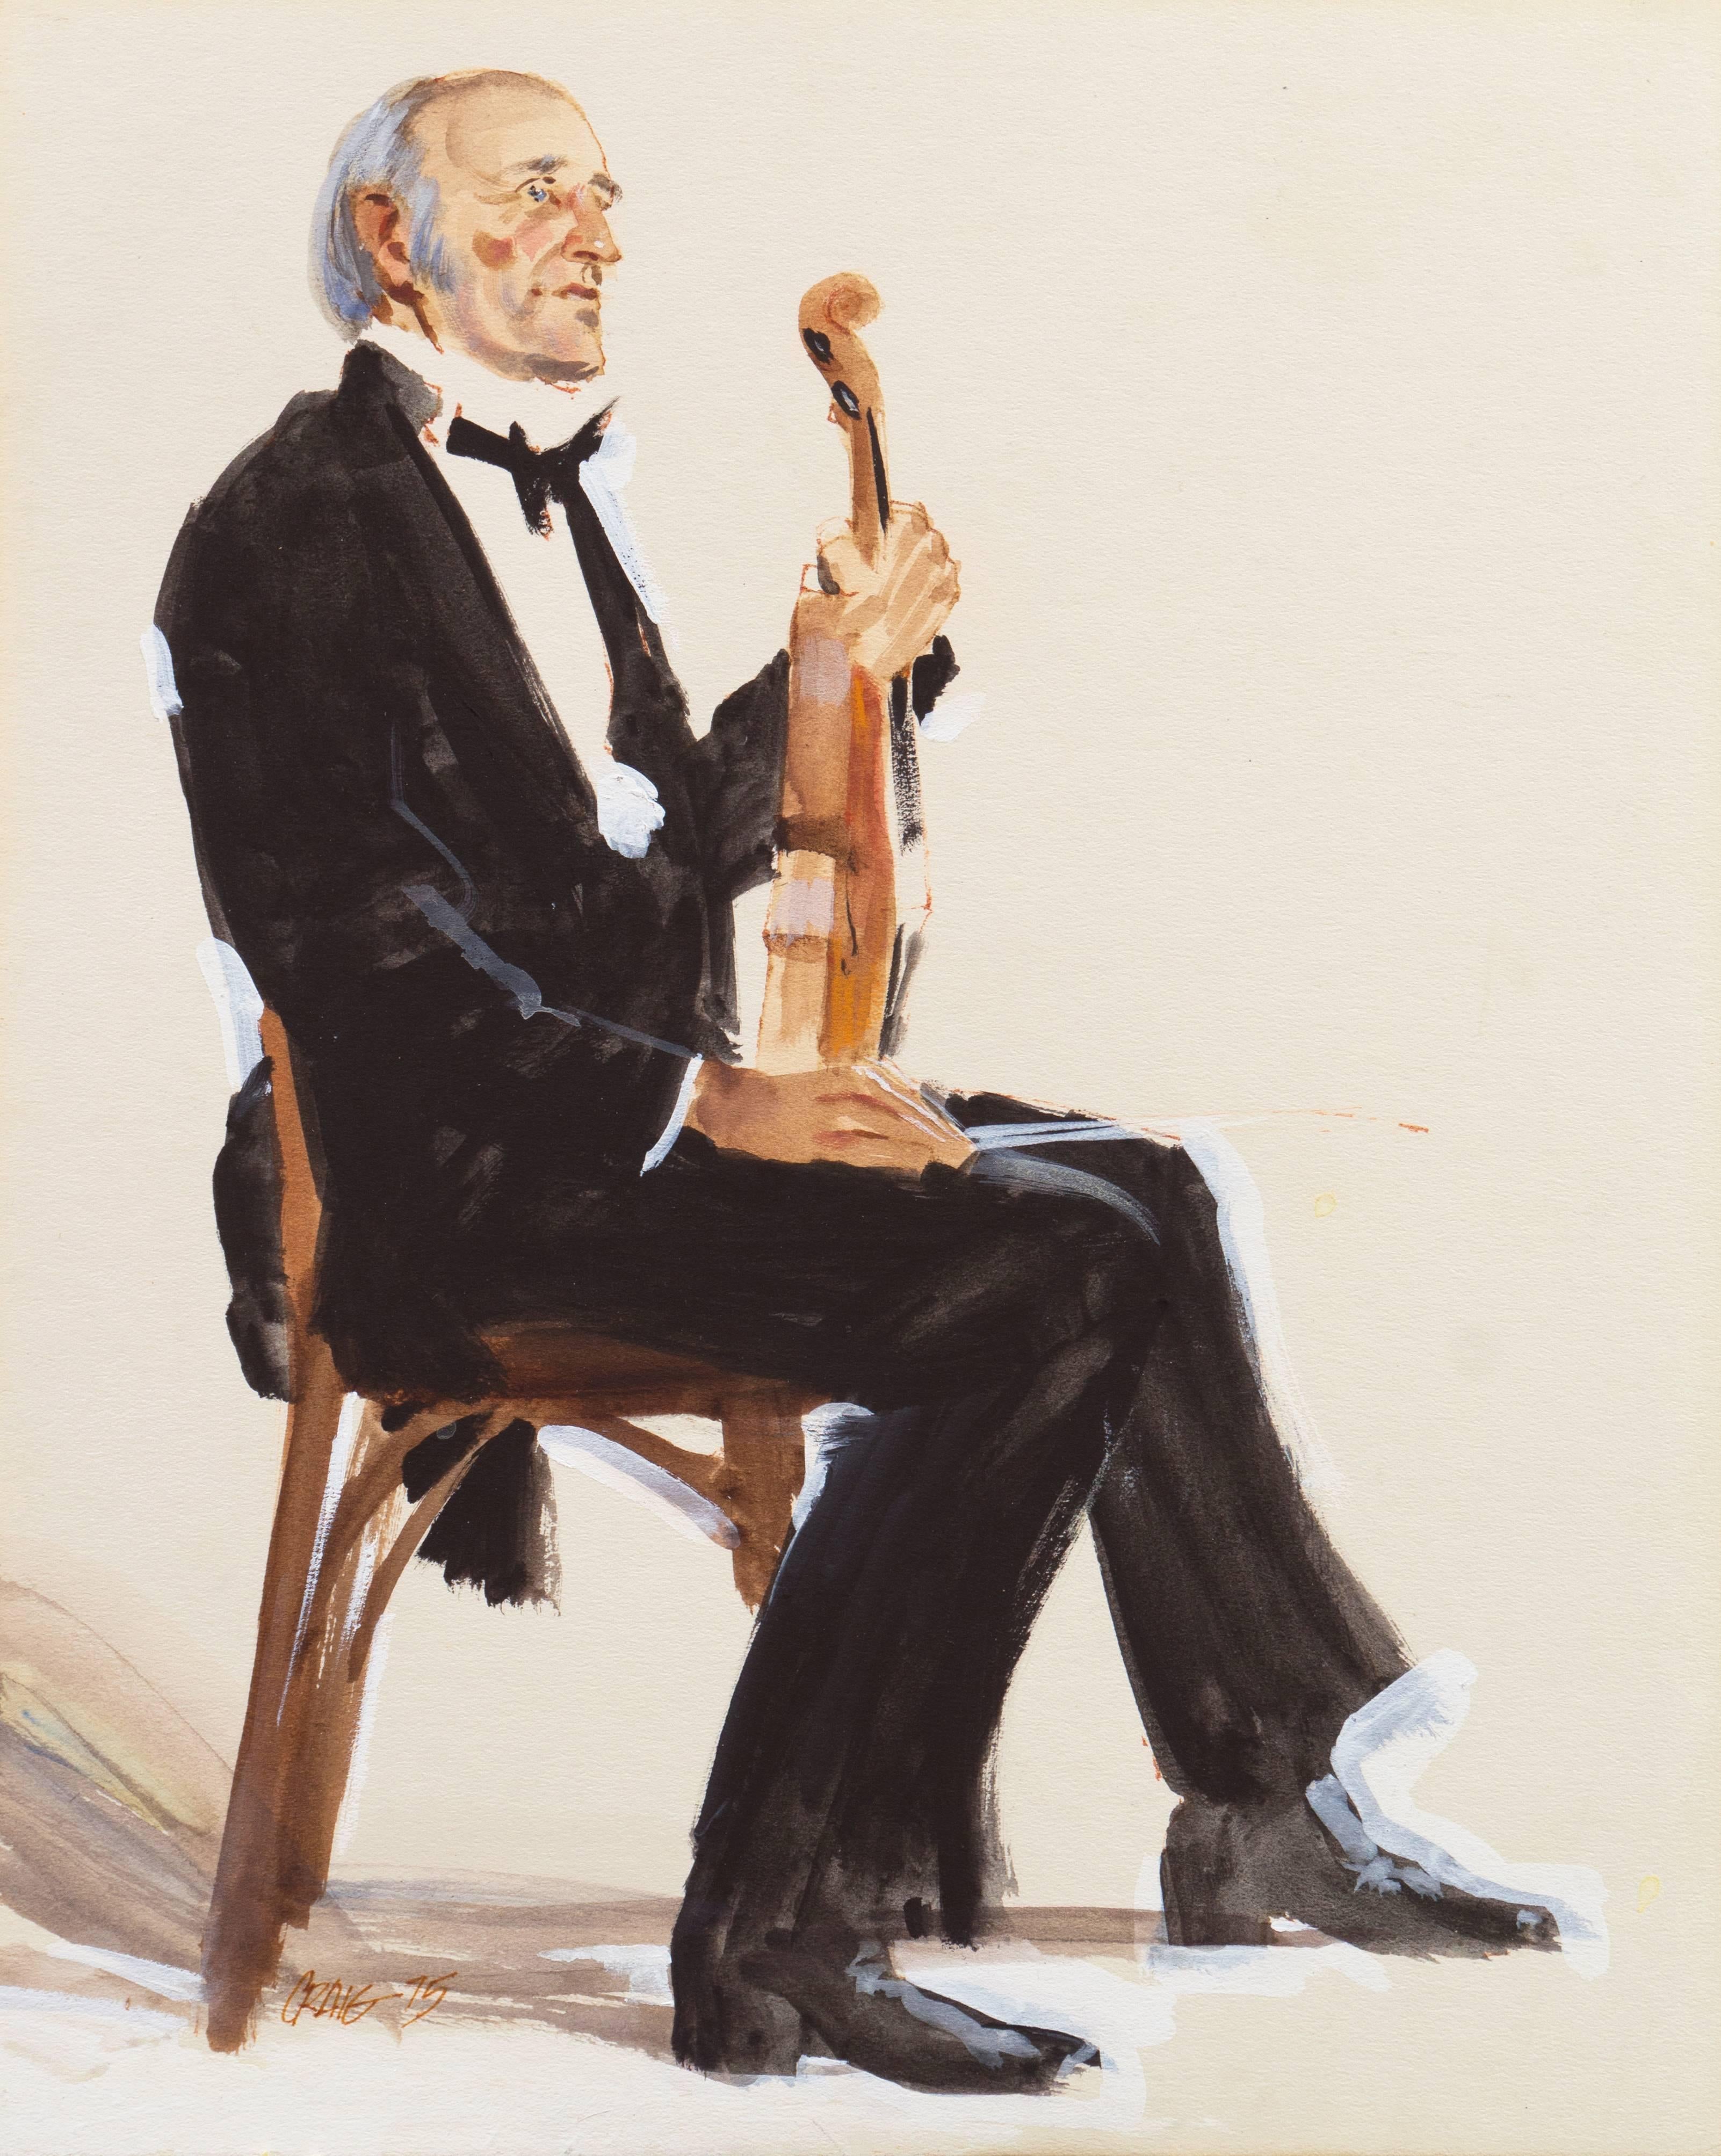 Craig Nelson Nude Painting - 'The Violinist', Art Center, Los Angeles, California 